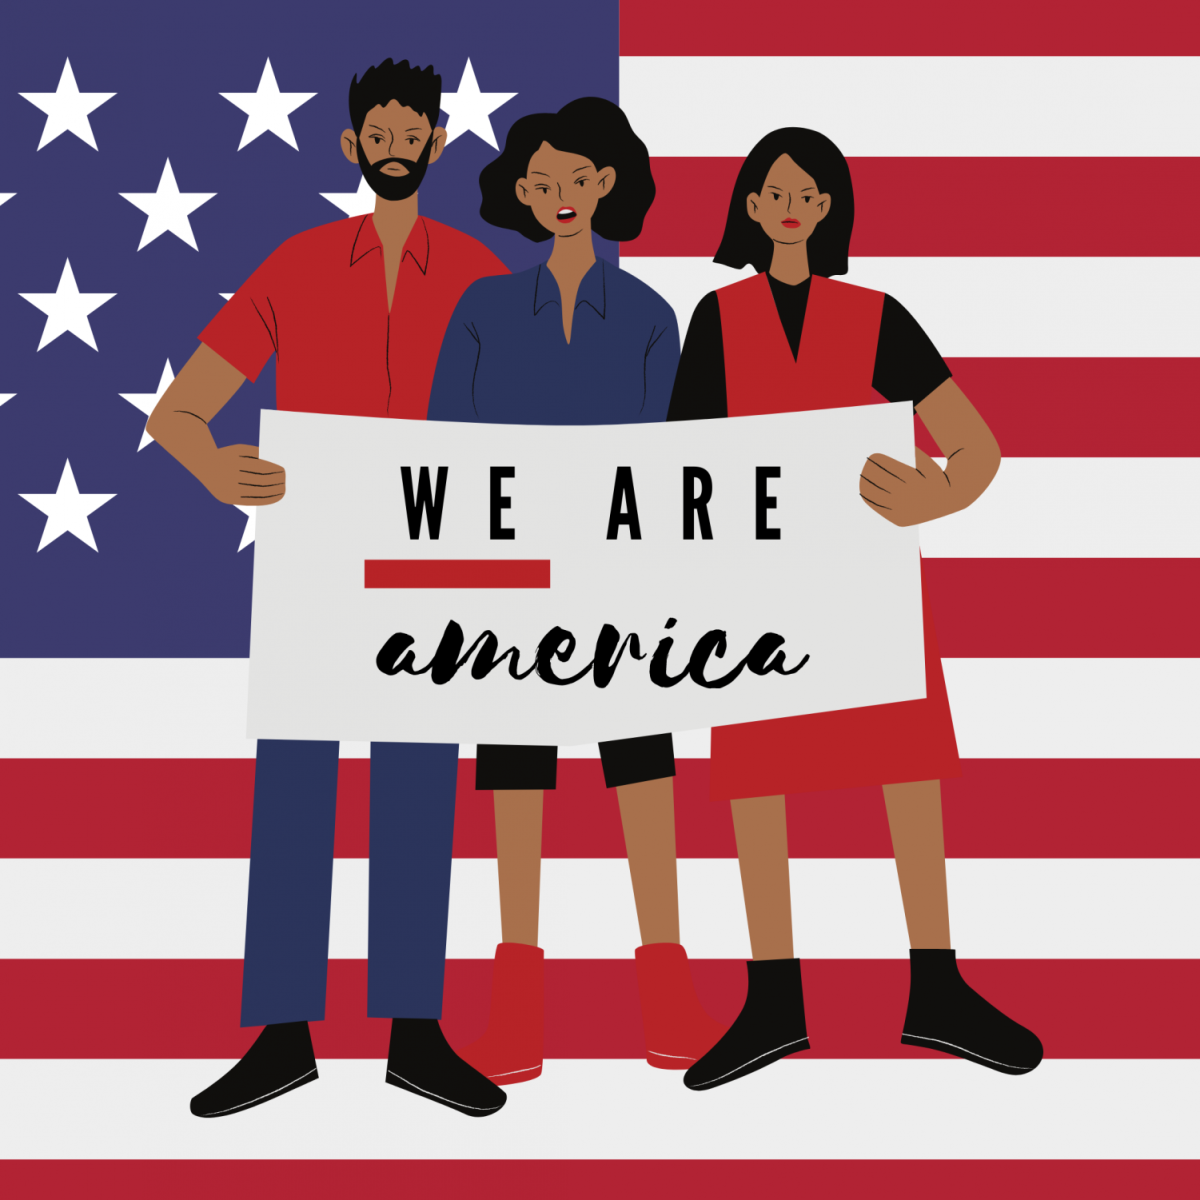 An+illustration+of+three+people+of+color%2C+one+man+and+two+women%2C+stand+in+front+of+an+American+Flag+holding+a+sign+that+reads+%26%238220%3BWE+are+America.%26%238221%3B